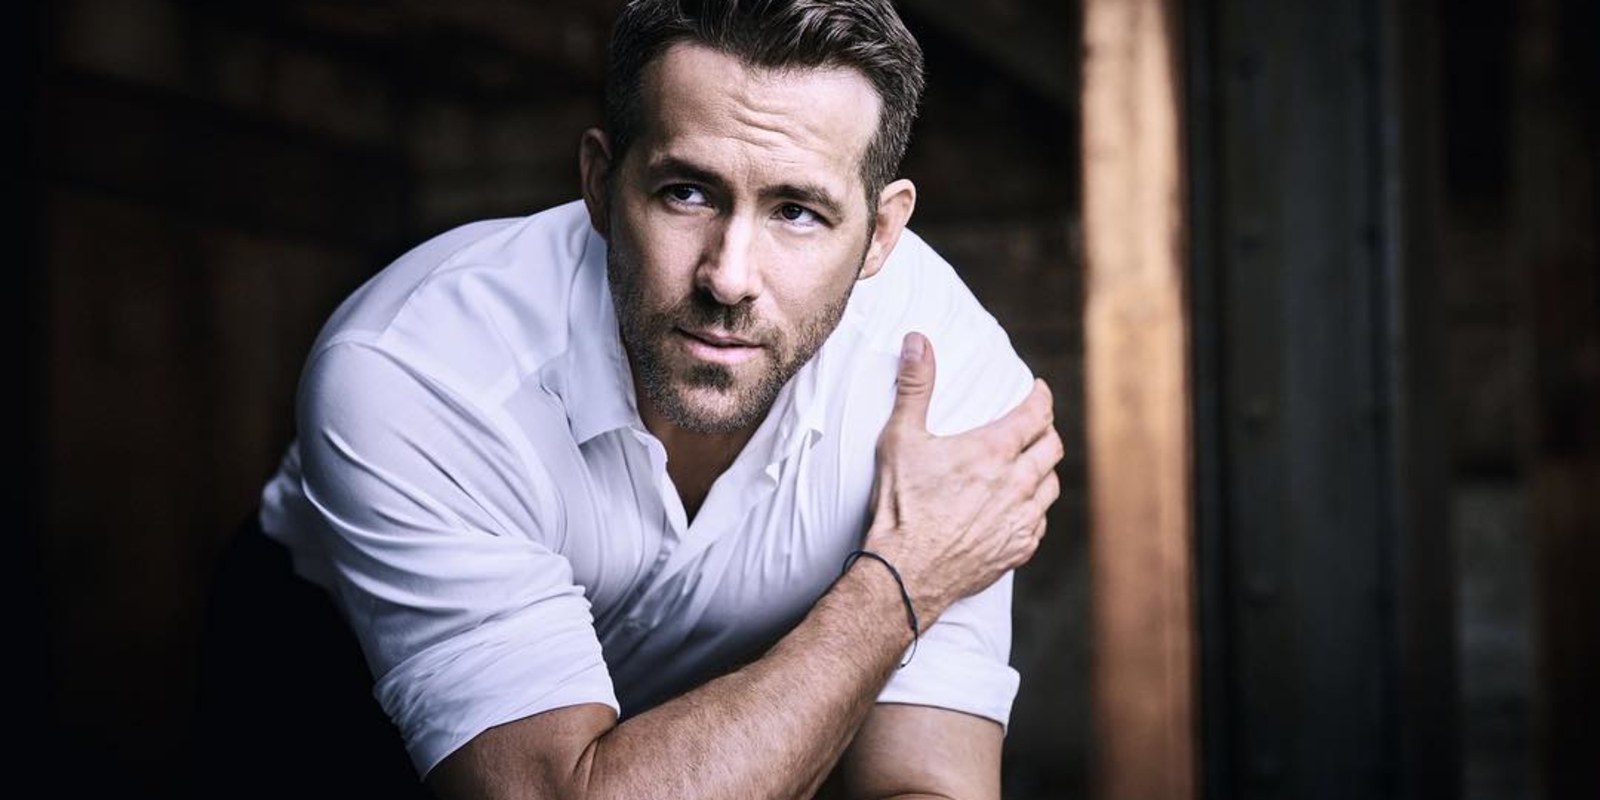 Ryan Reynolds: We live in really weird times right now